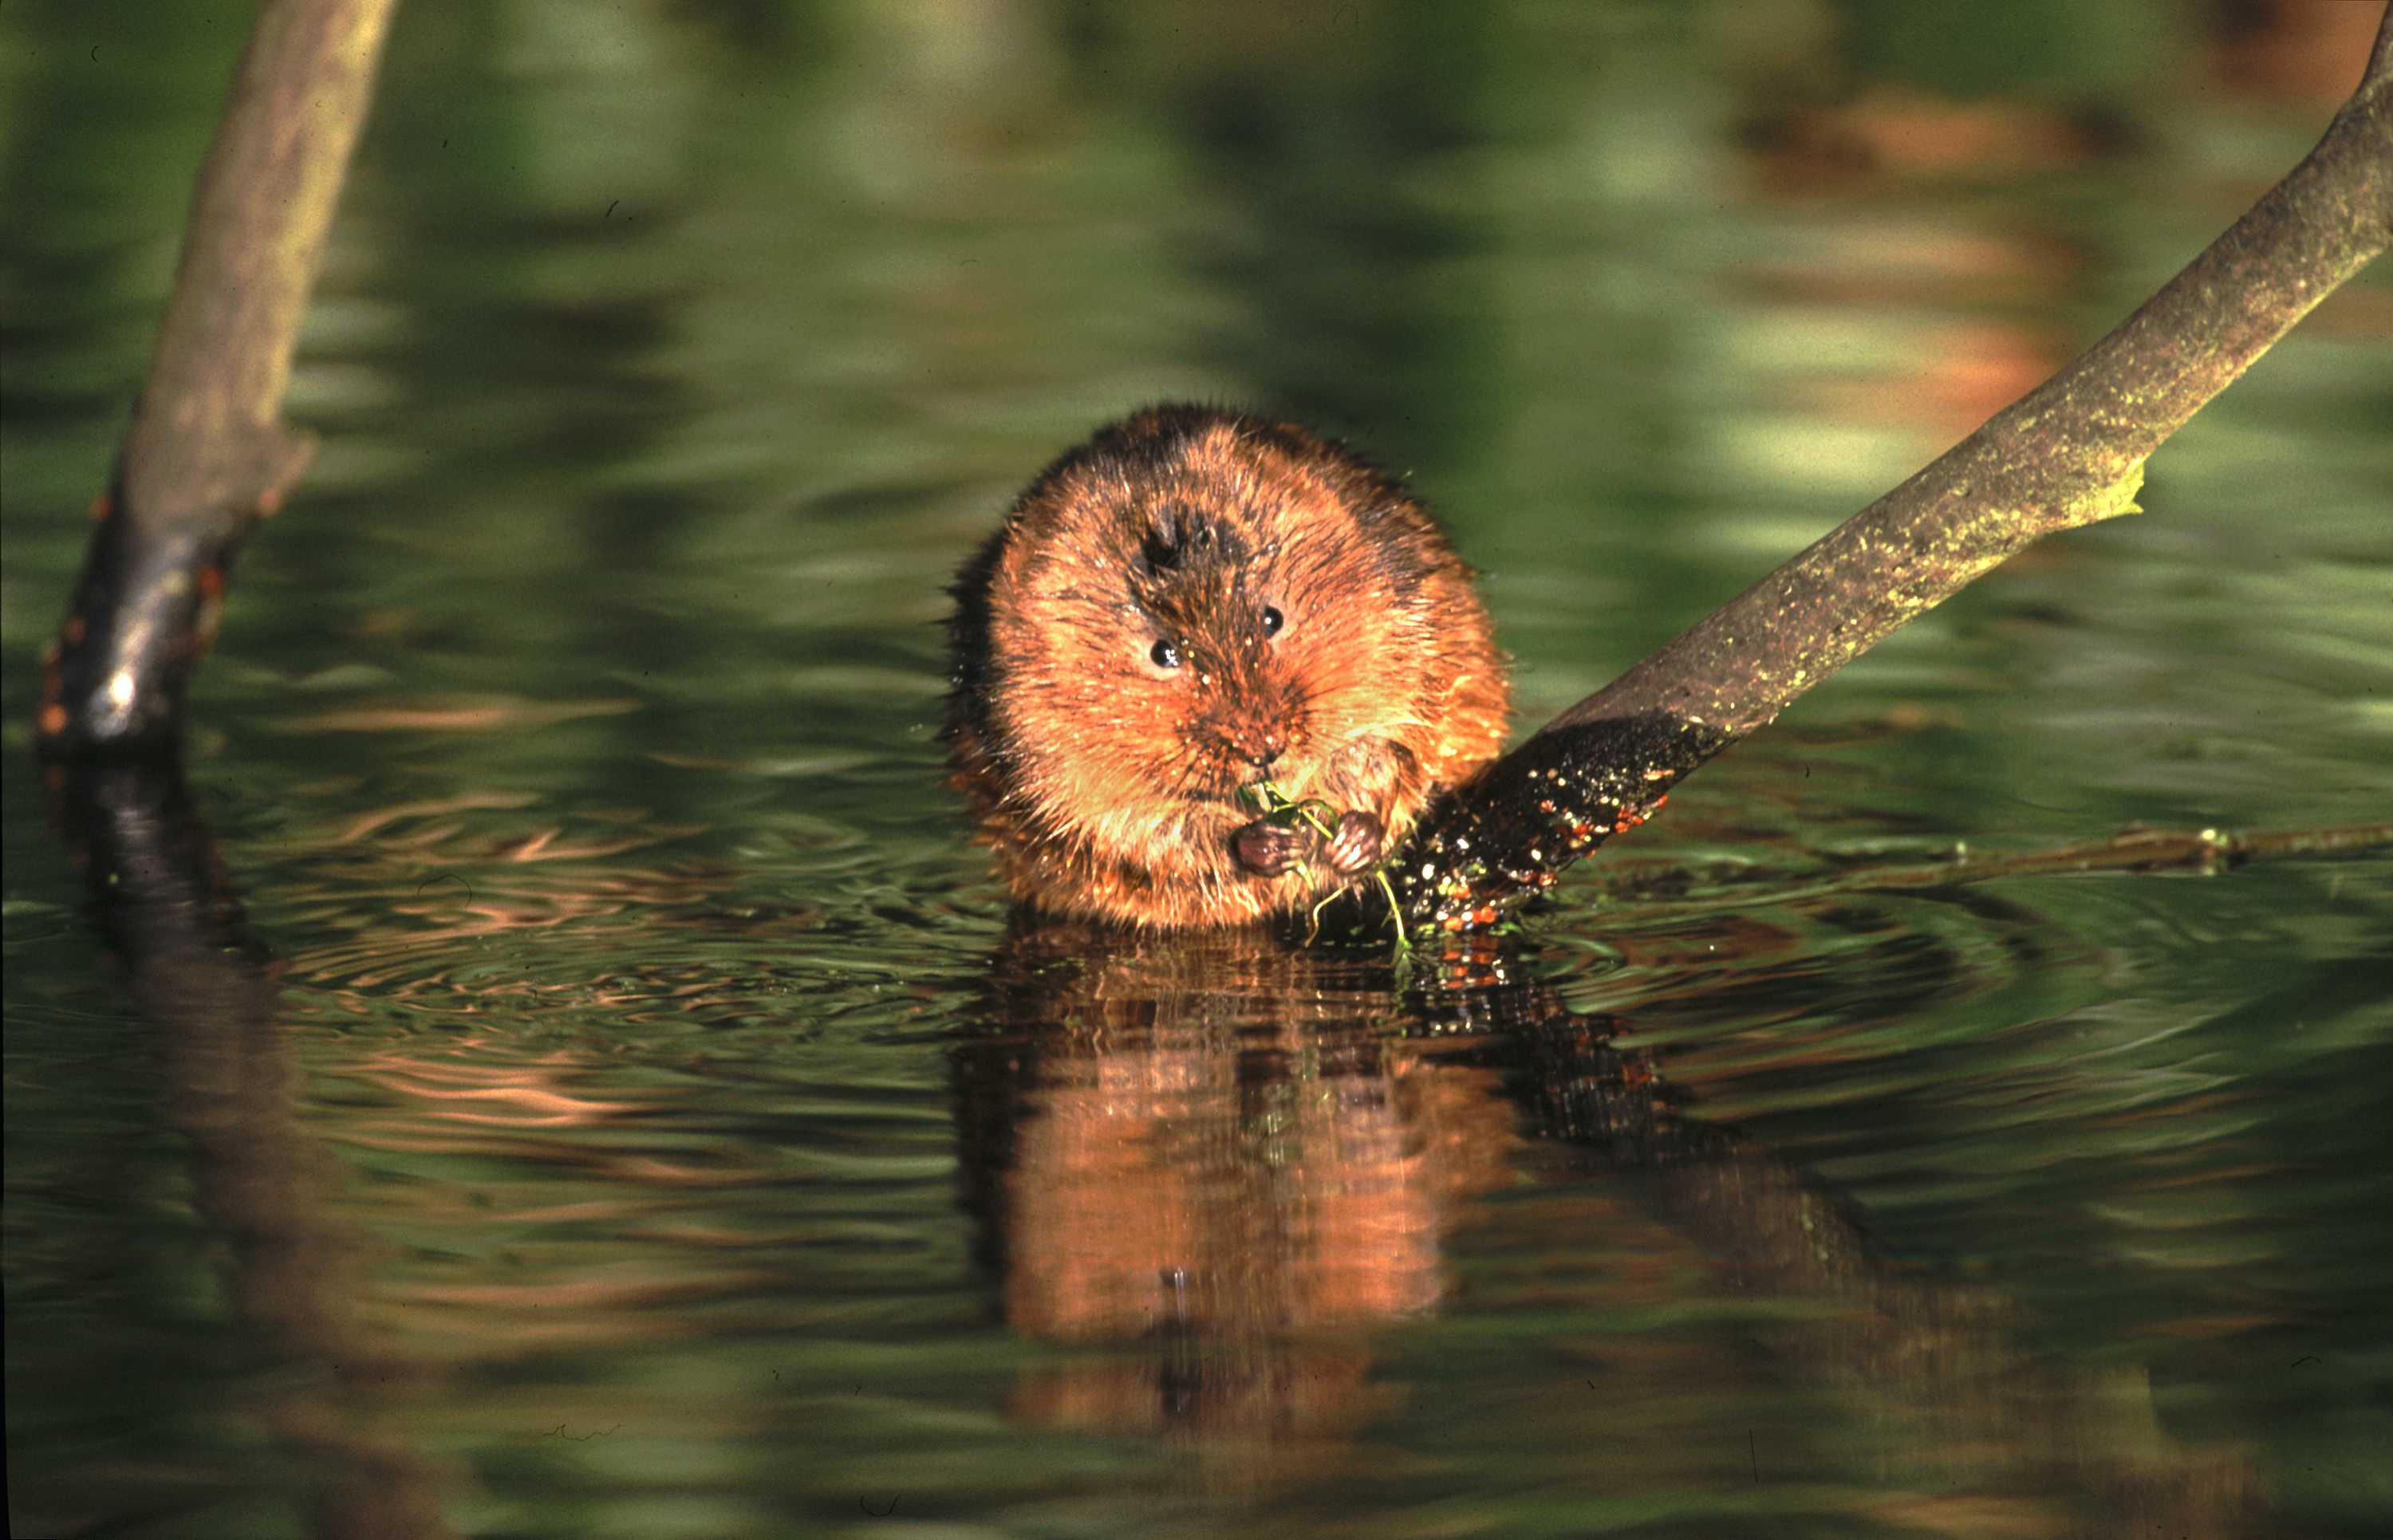 vole on twig in water